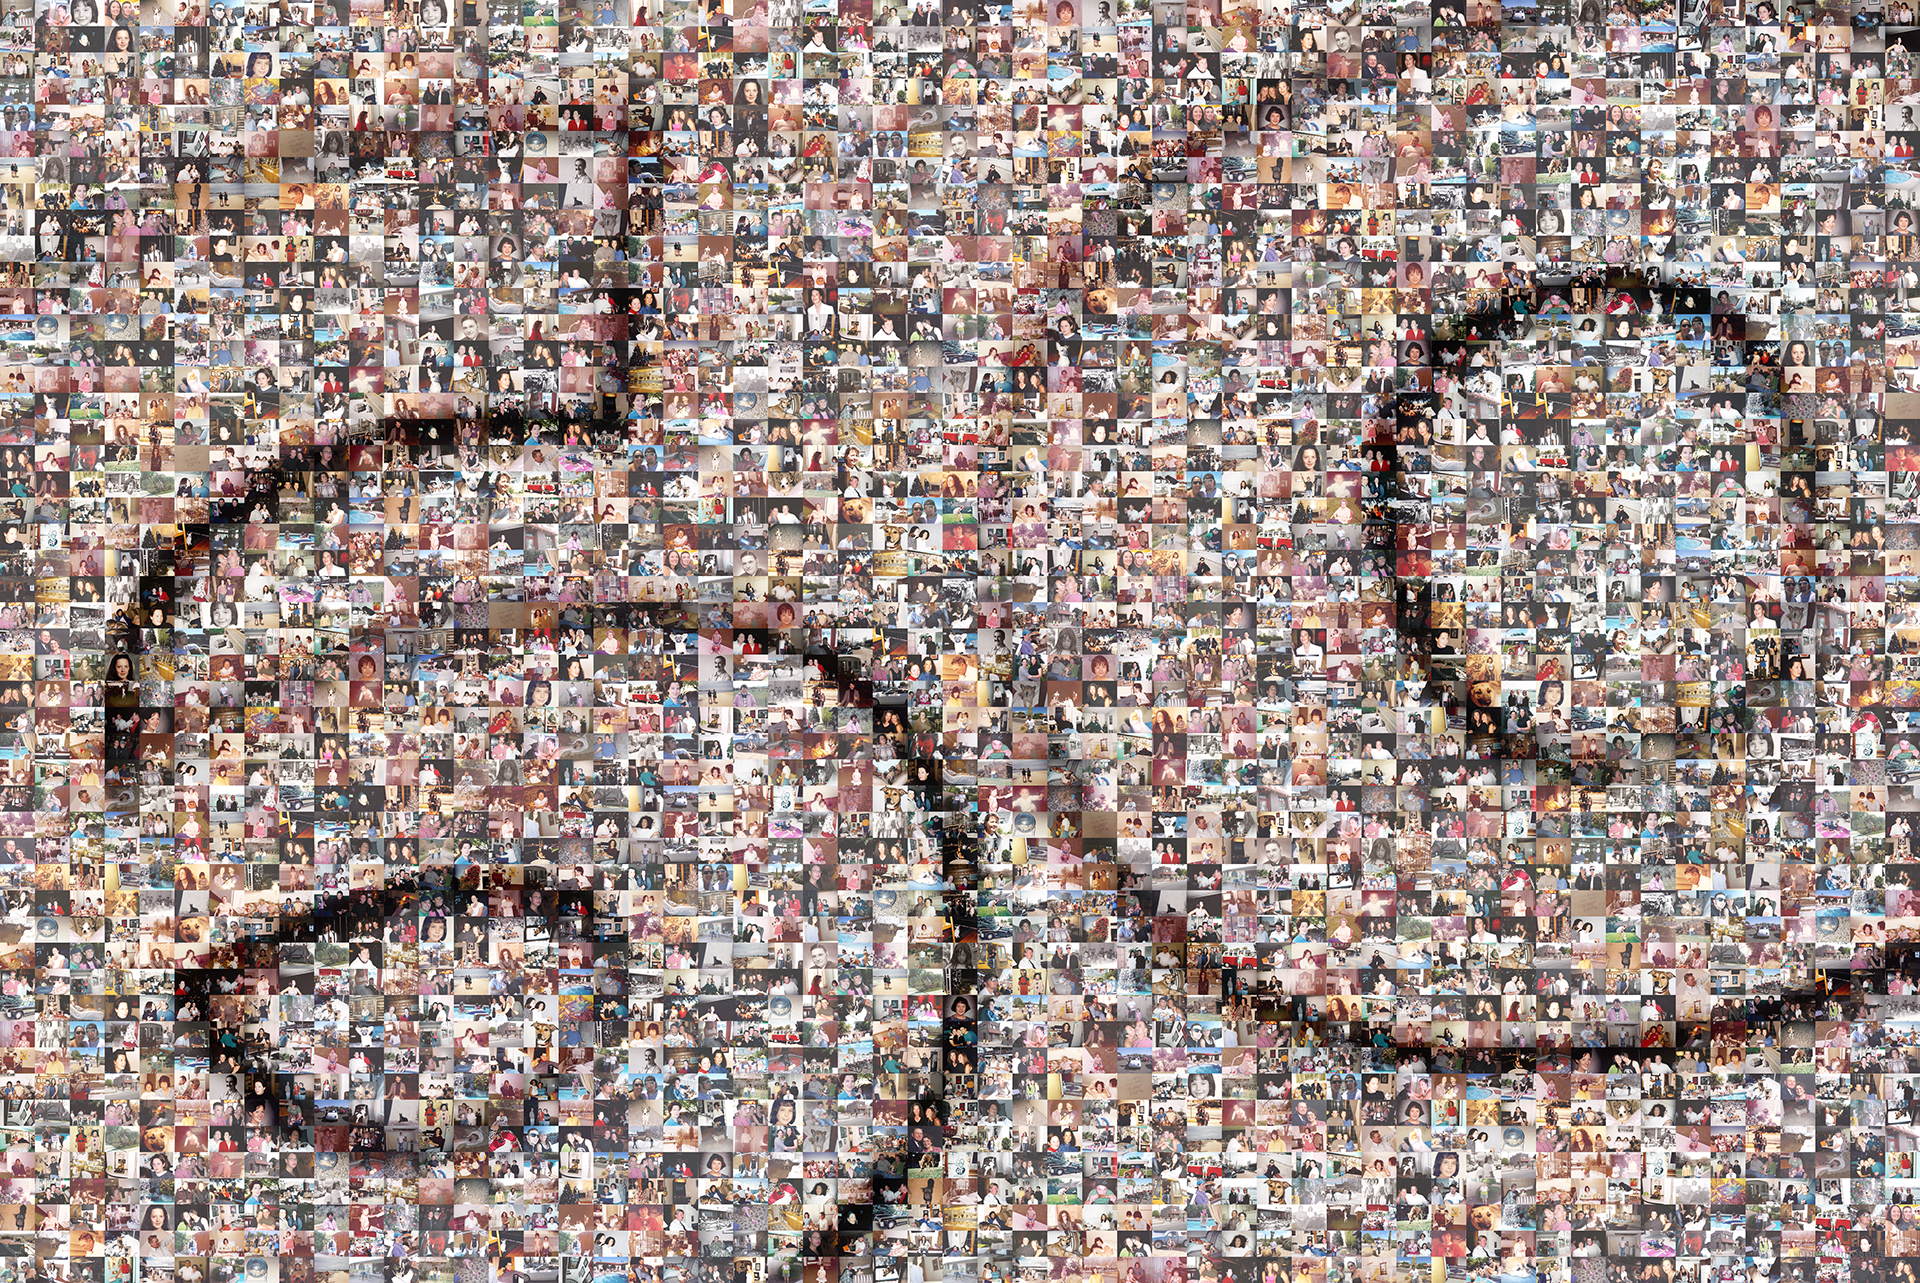 photo mosaic this birthday mosaic was created with 431 photos of family and friends